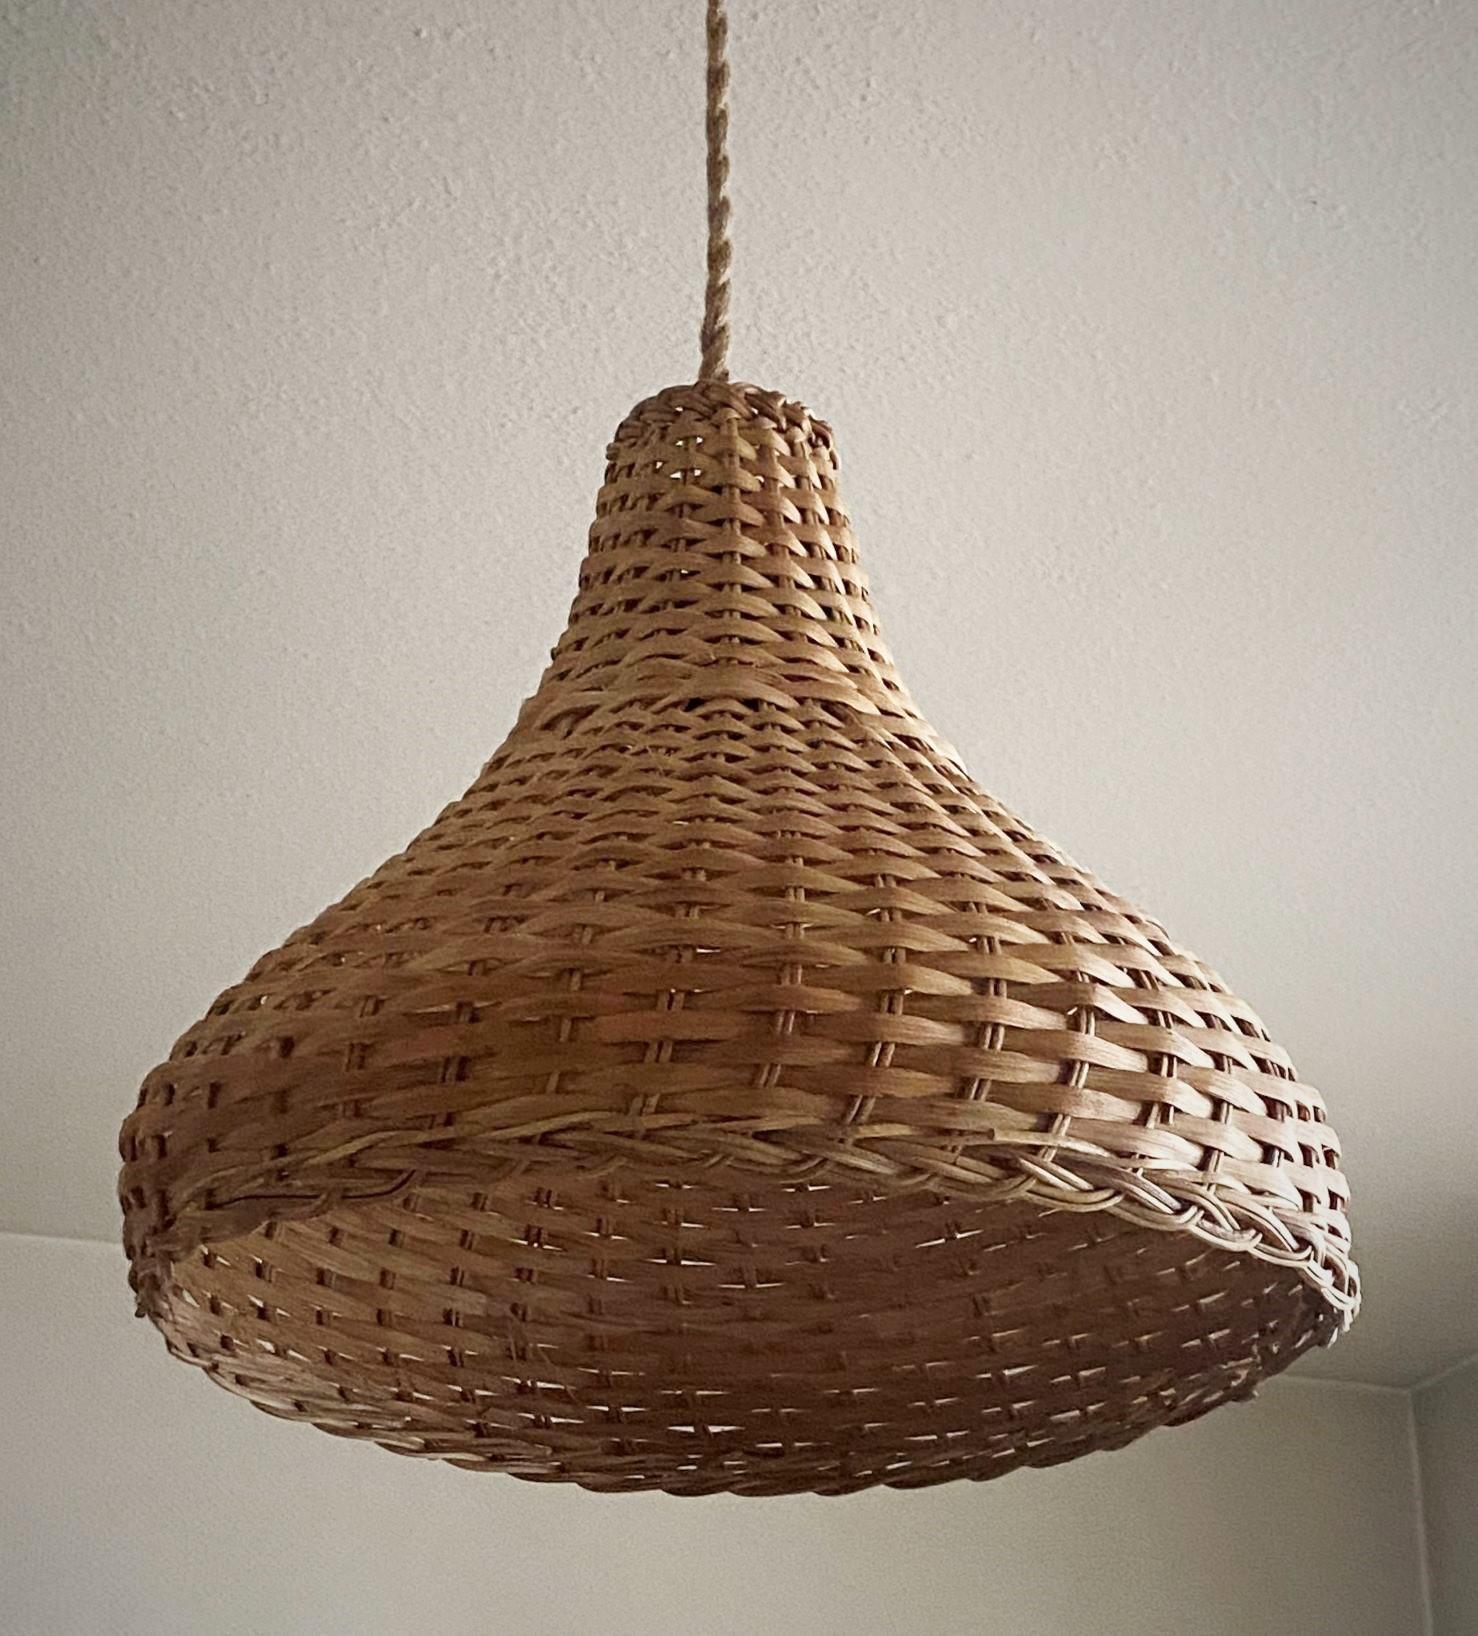 Vintage Scandinavian handcrafted natural woven rattan pendant light in basket shape from 1960s.
It takes one Edison E27 large sized bulb. 
Overall Hight as pictured: 36